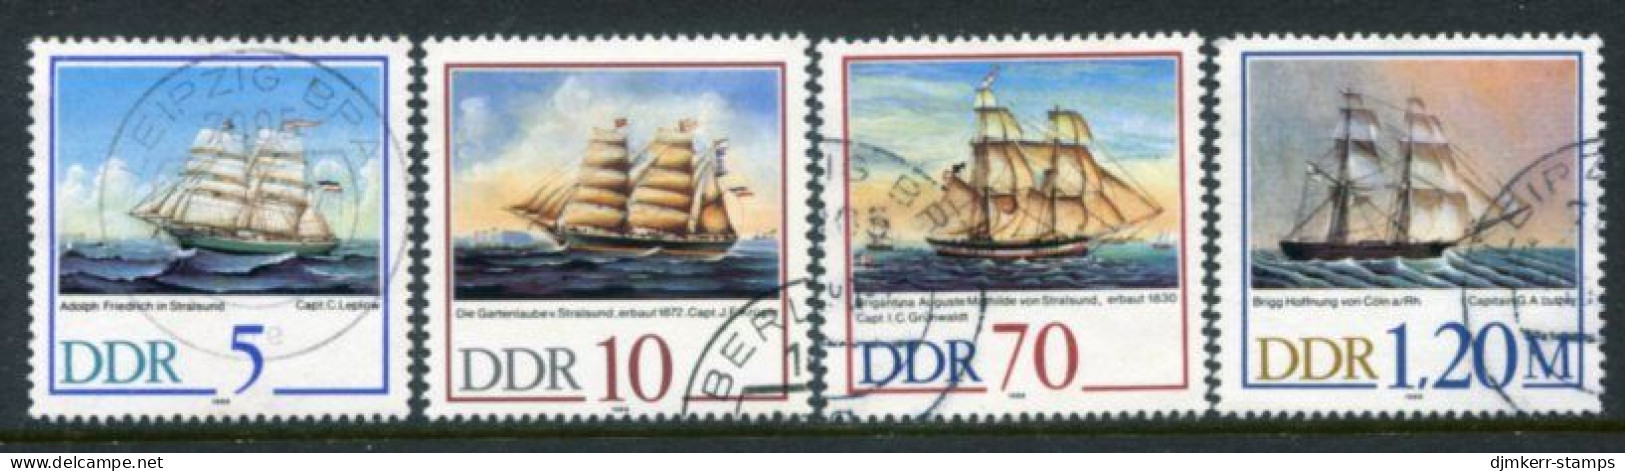 EAST GERMANY / DDR 1988 Sailing Ships Used .  Michel 3198-201 - Used Stamps